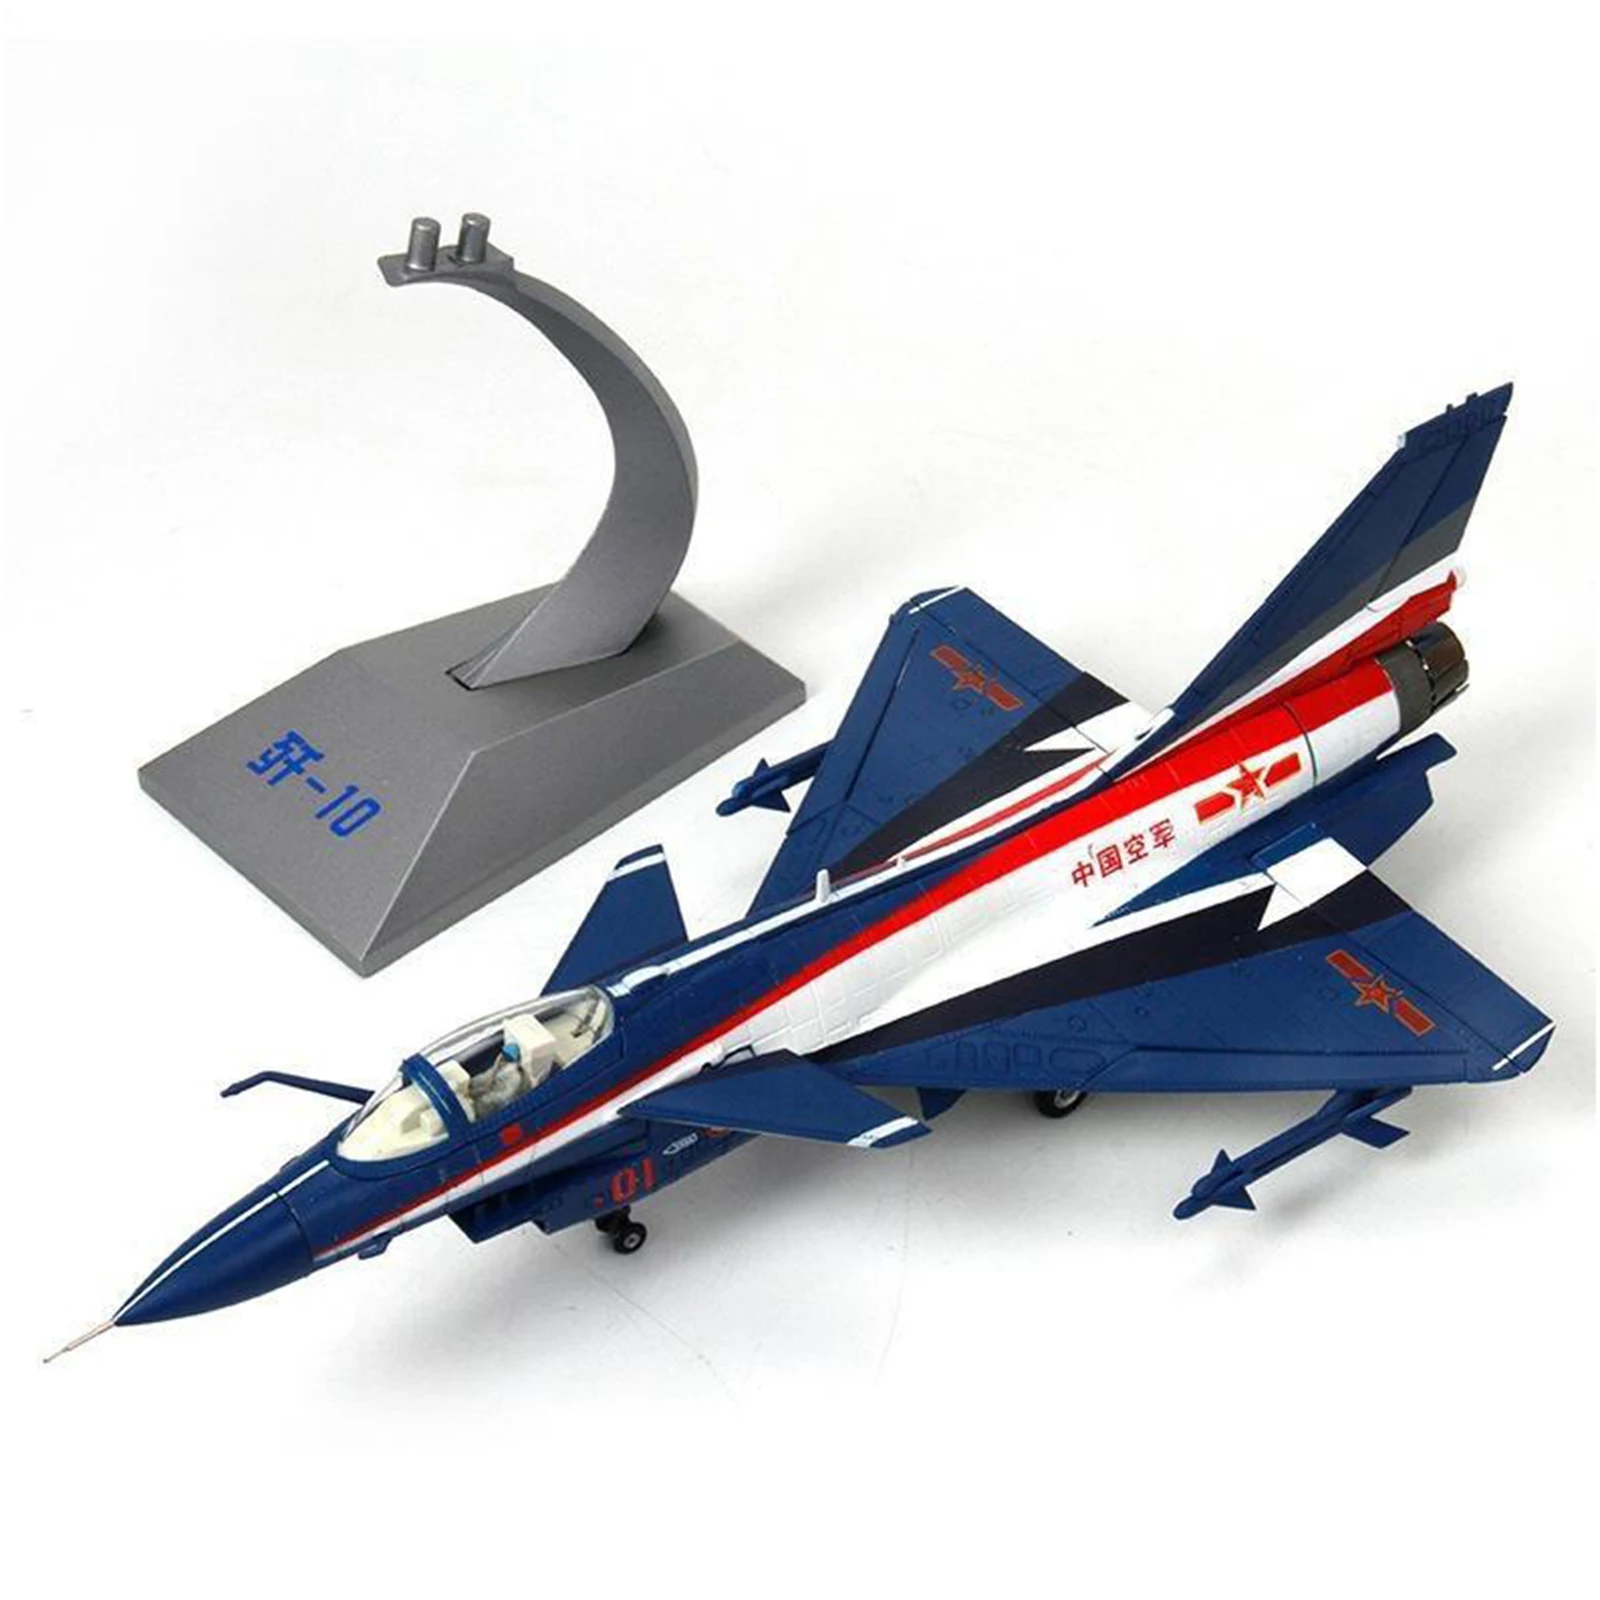 

1:48 Scale Military Airline Aeroplane F-10 Fighter Aircraft Aviation Die Cast Airplane Model with Stand Collectibles Kids Toy